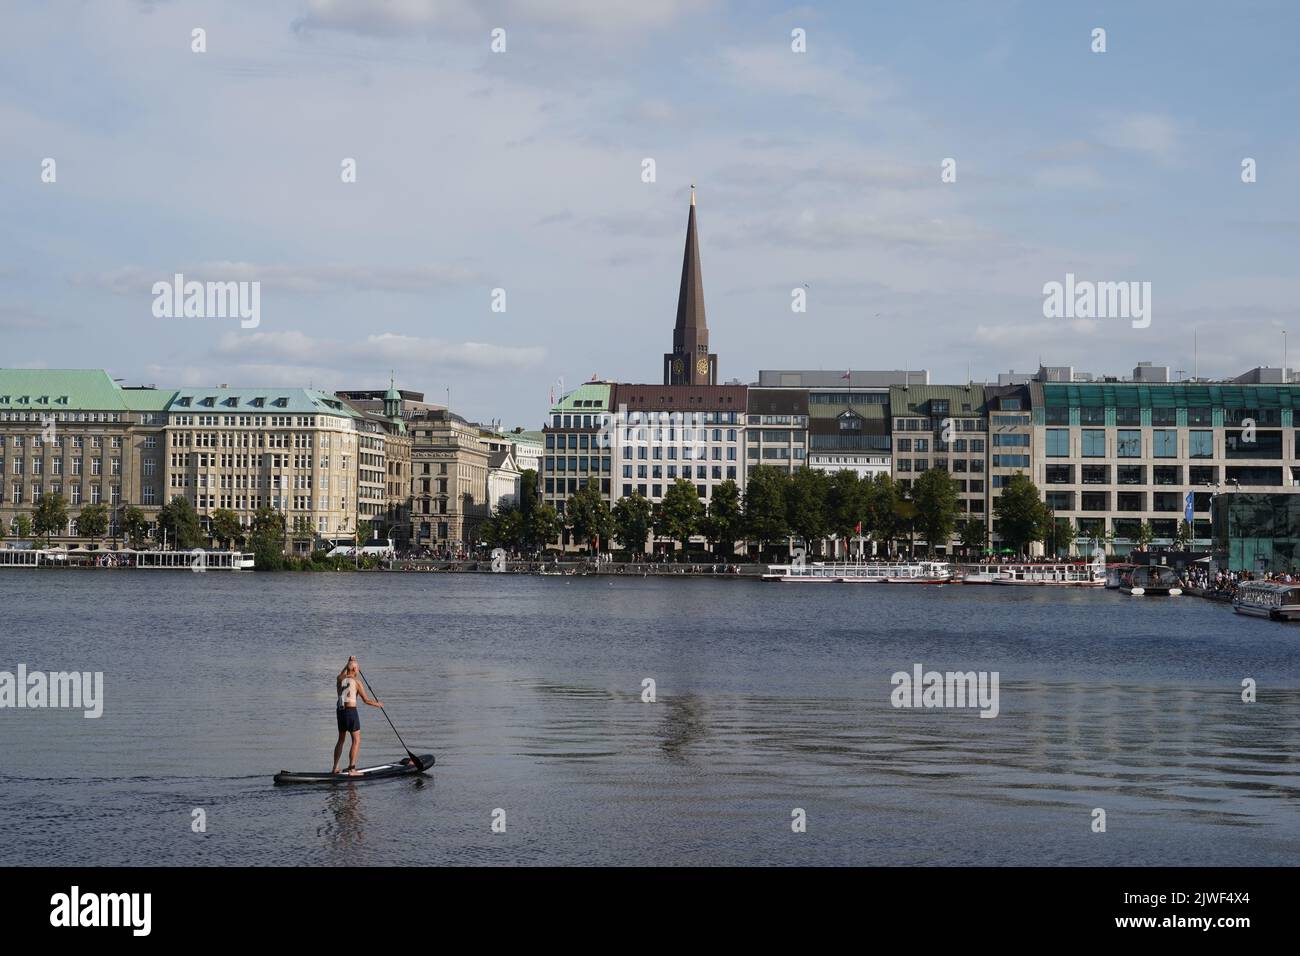 Man standing on a stand up paddle board is paddling on Binnenalster in Hamburg. Stock Photo